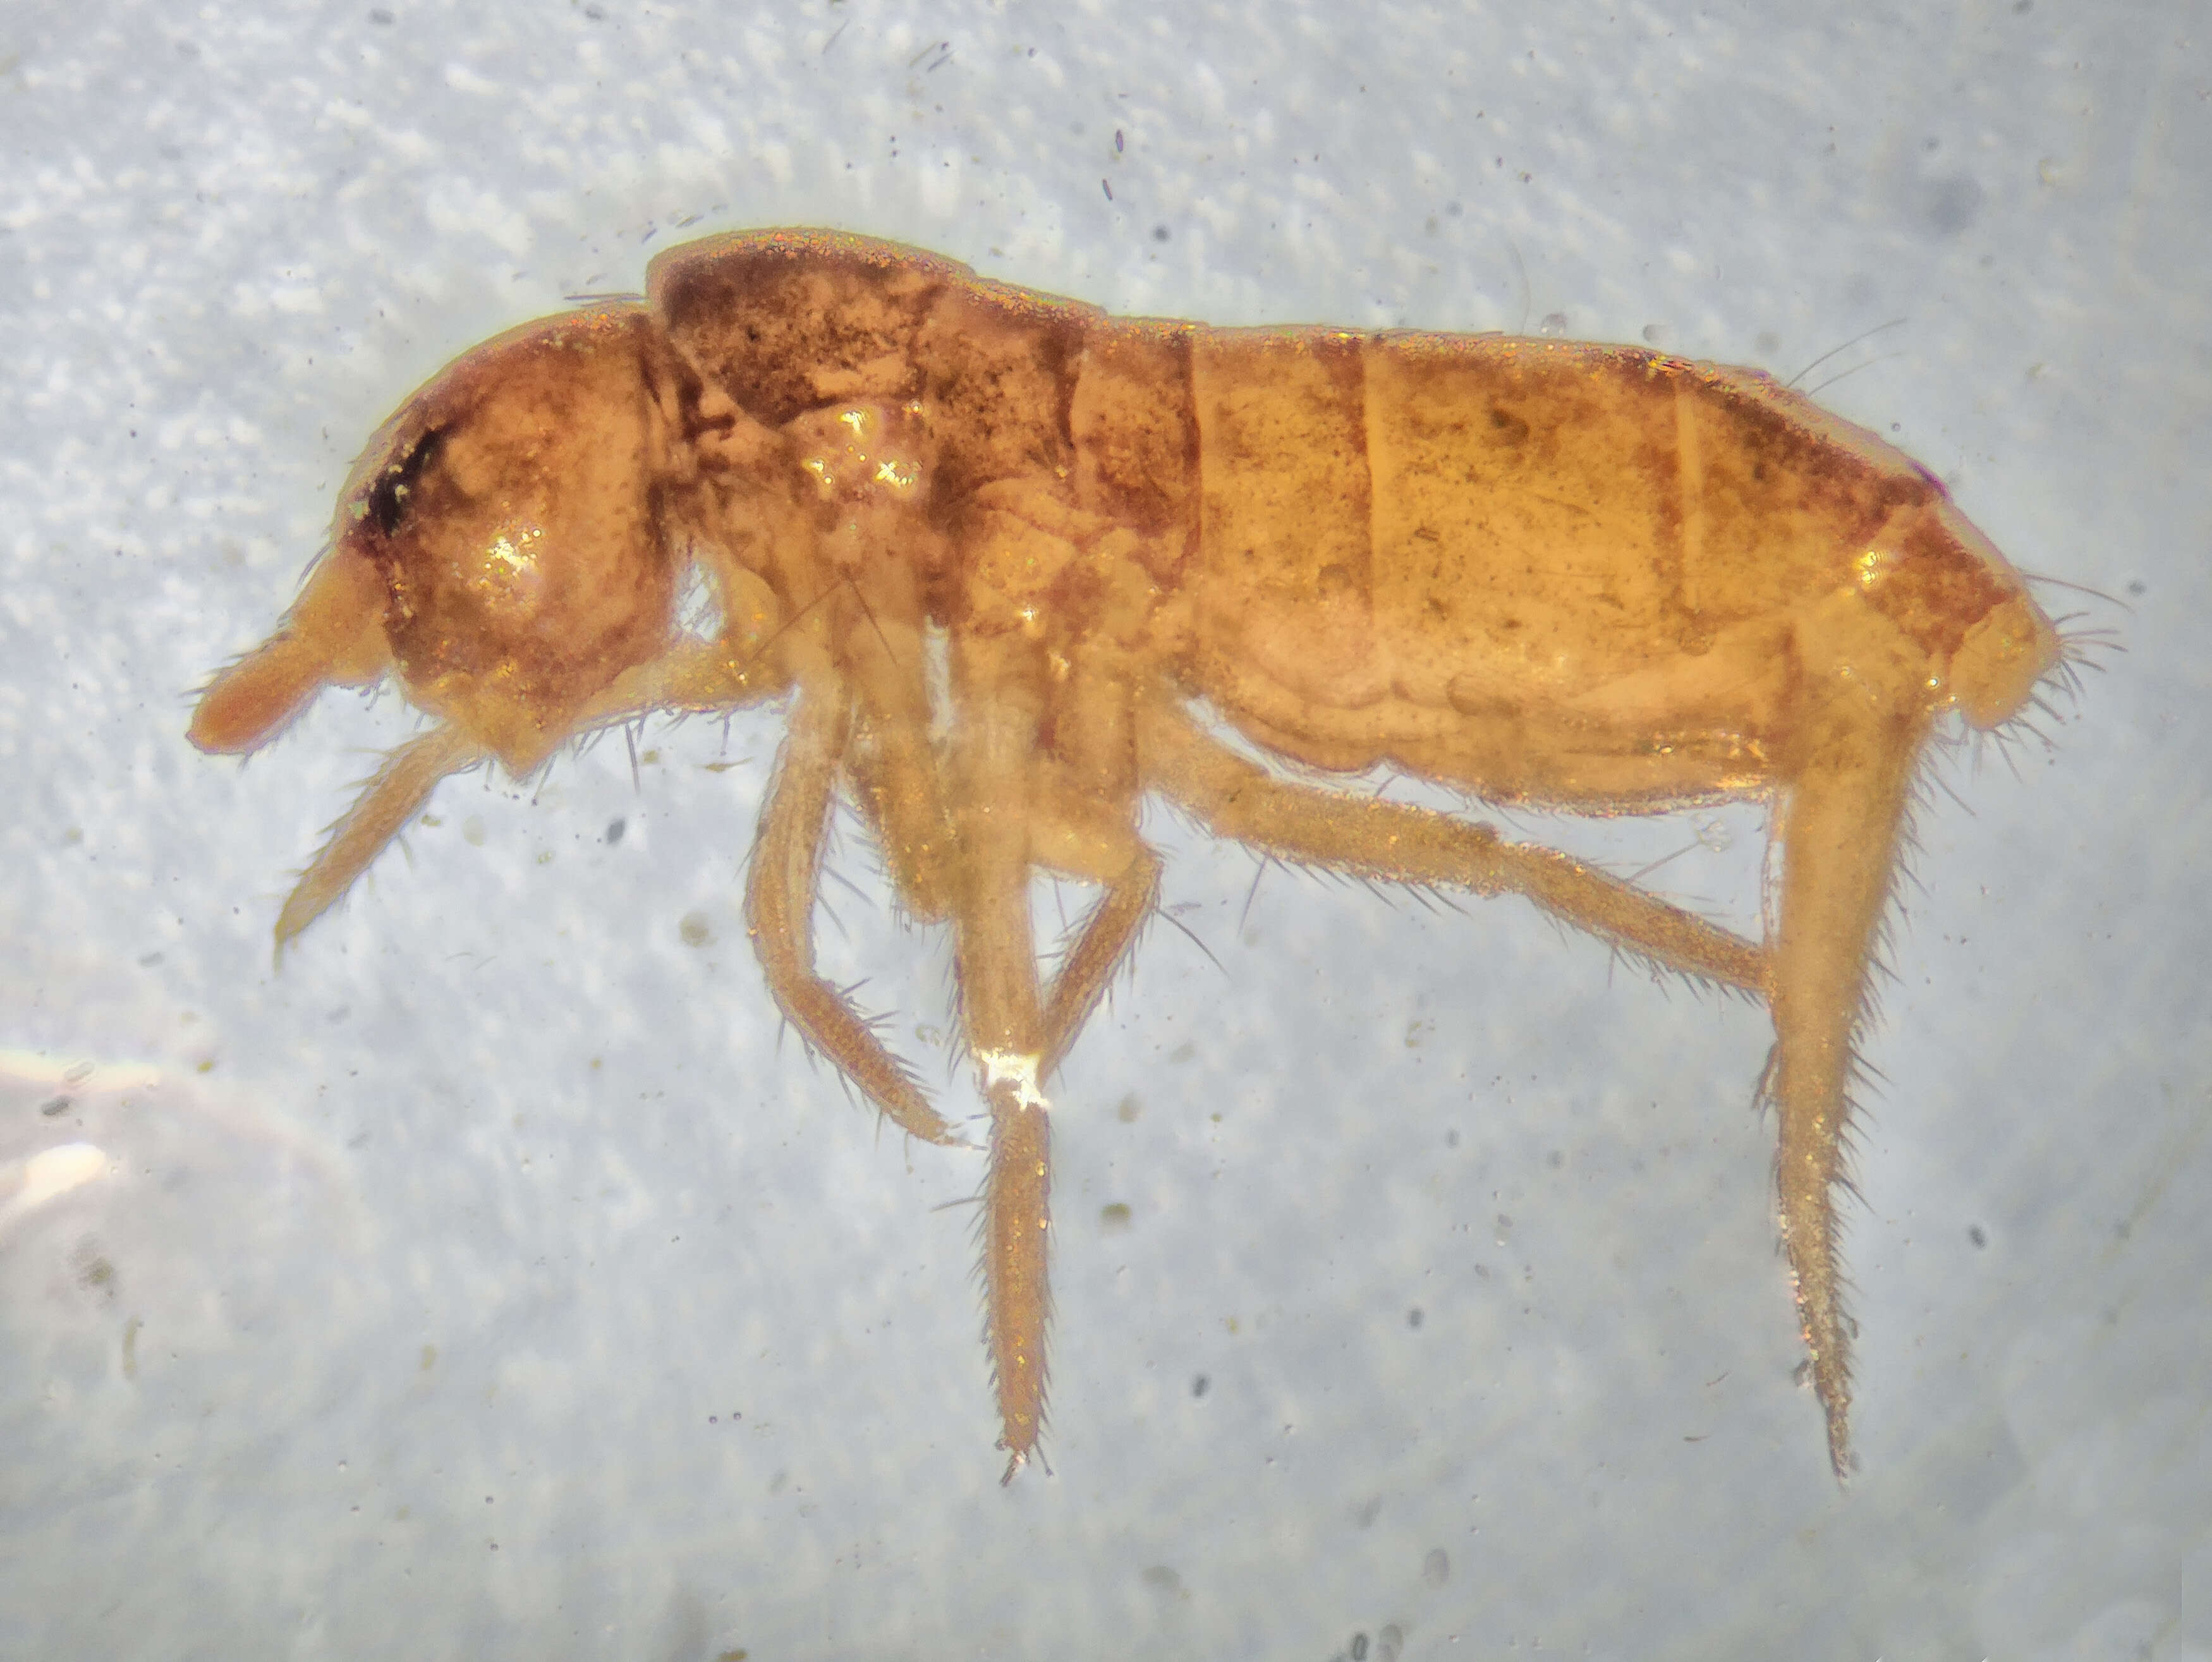 Image of Elongate-bodied Springtails